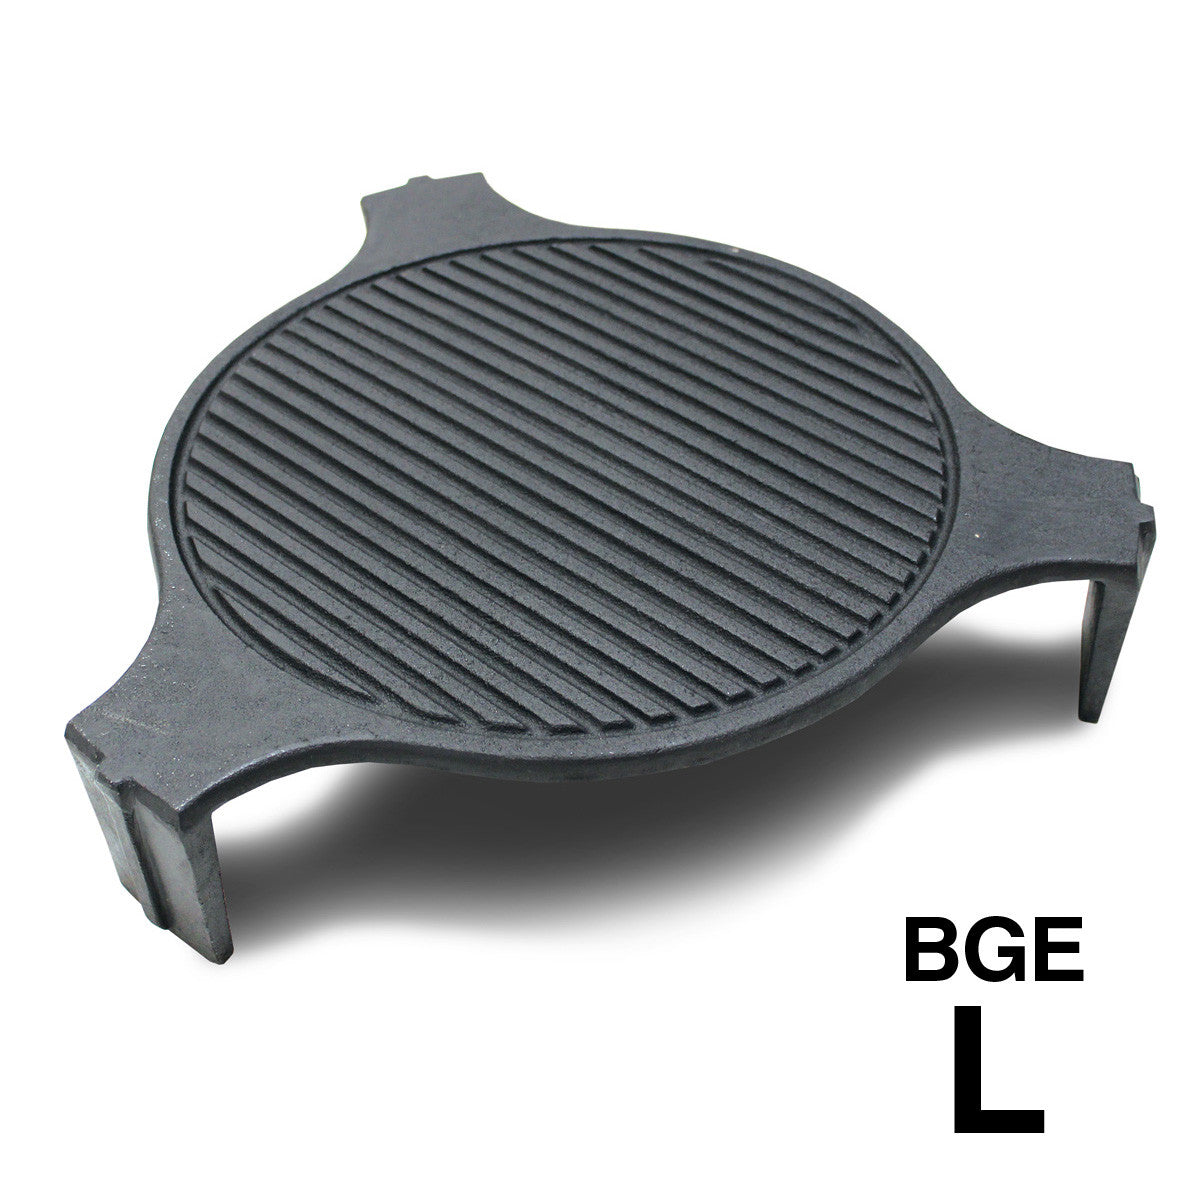 Plate Setter  Smokeware Grilling Accessories Place Setter Conveggtor Primo  Ceramic Kamado BBQ Cooker Indirect